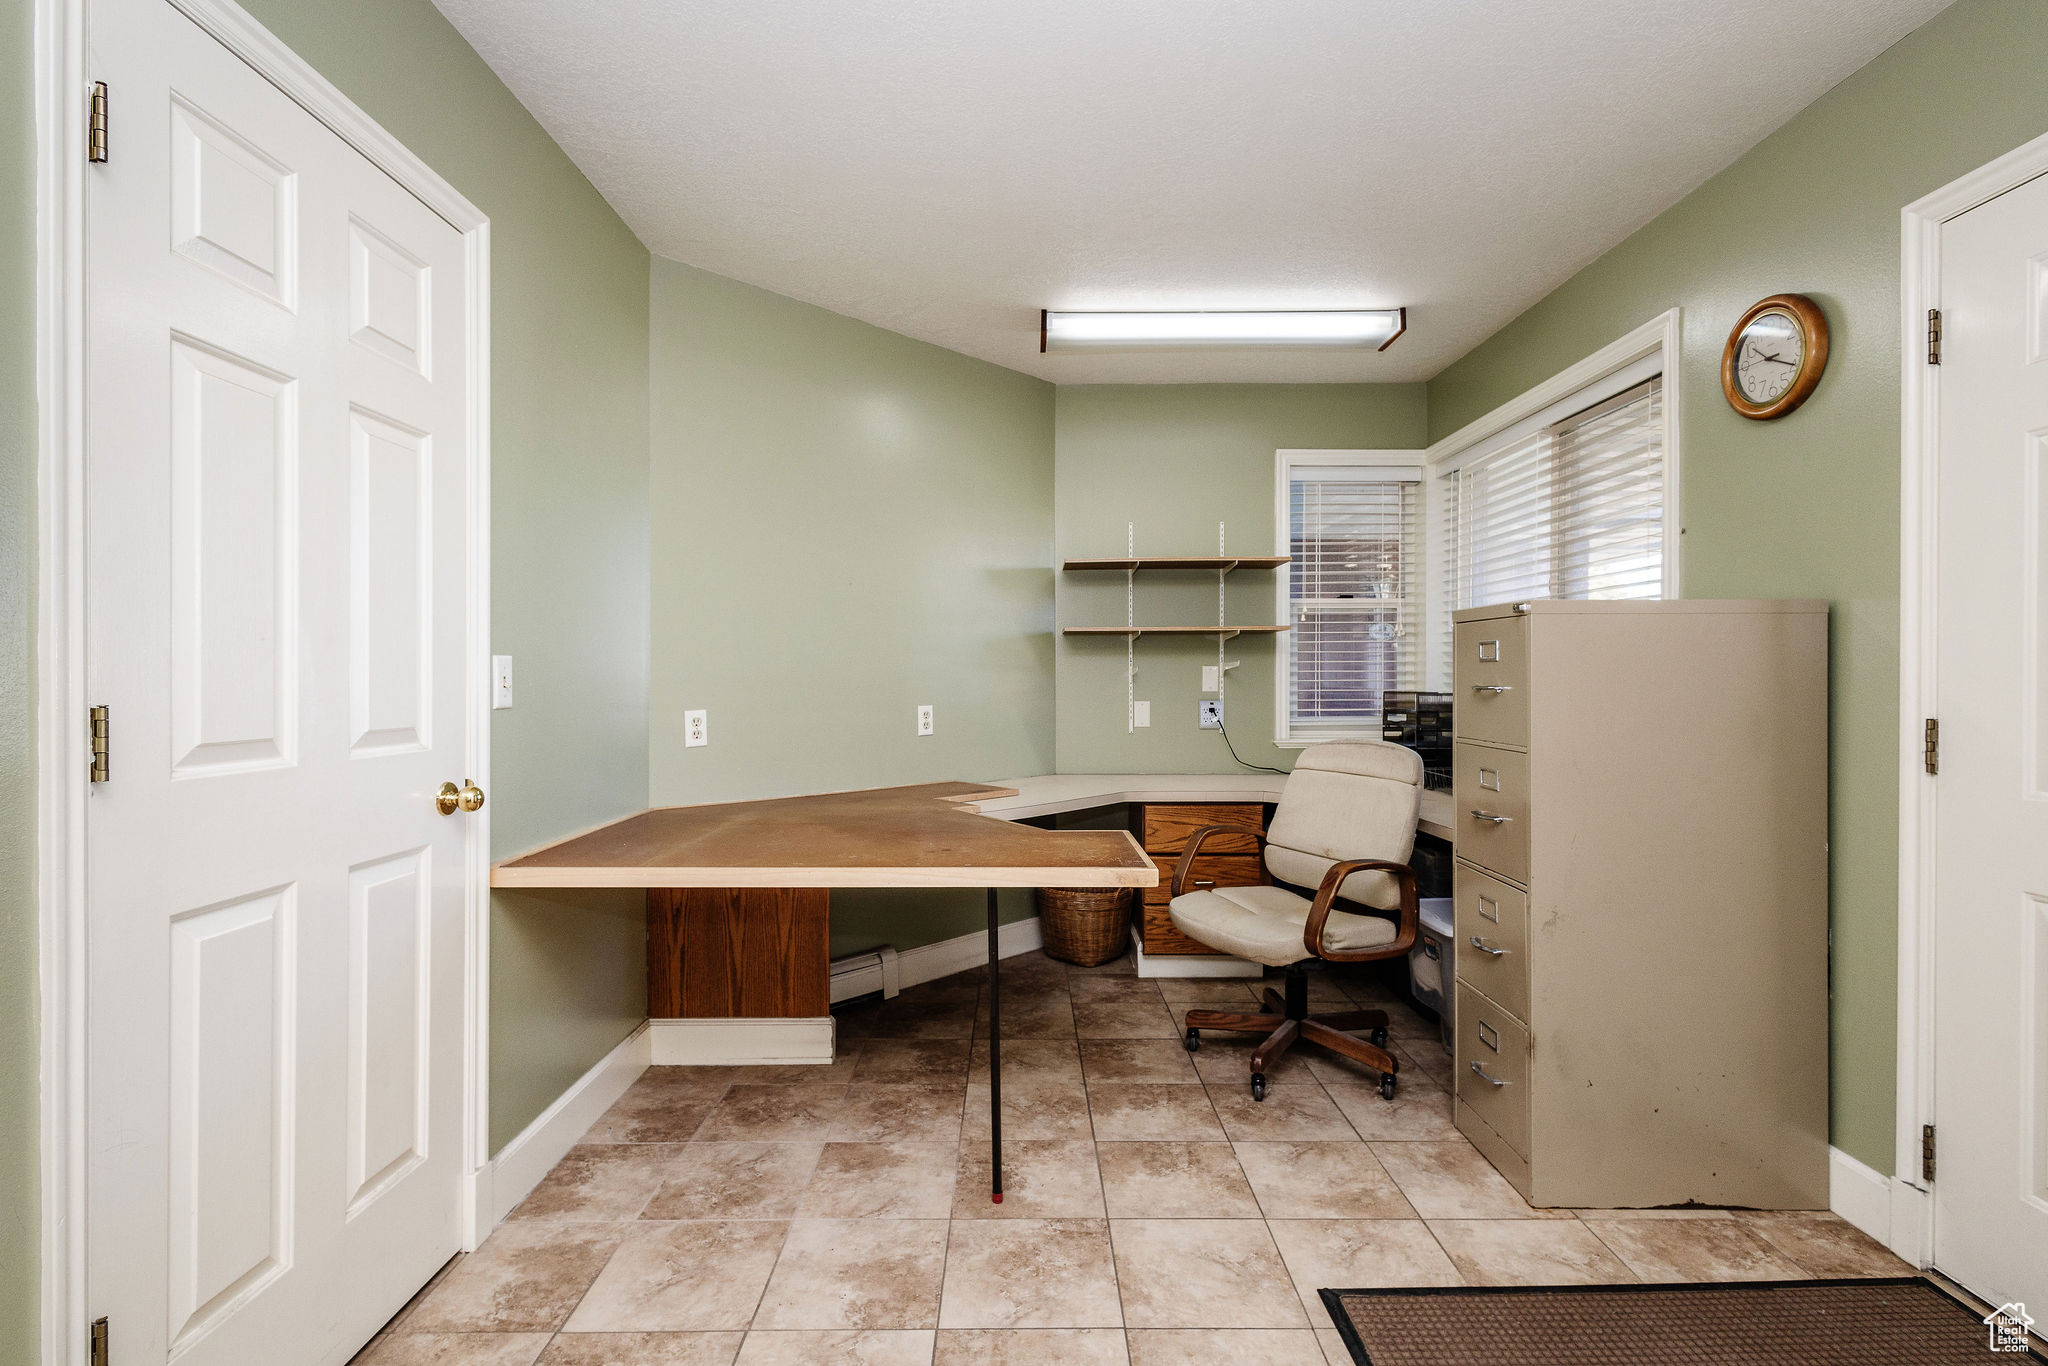 Office area with light tile floors